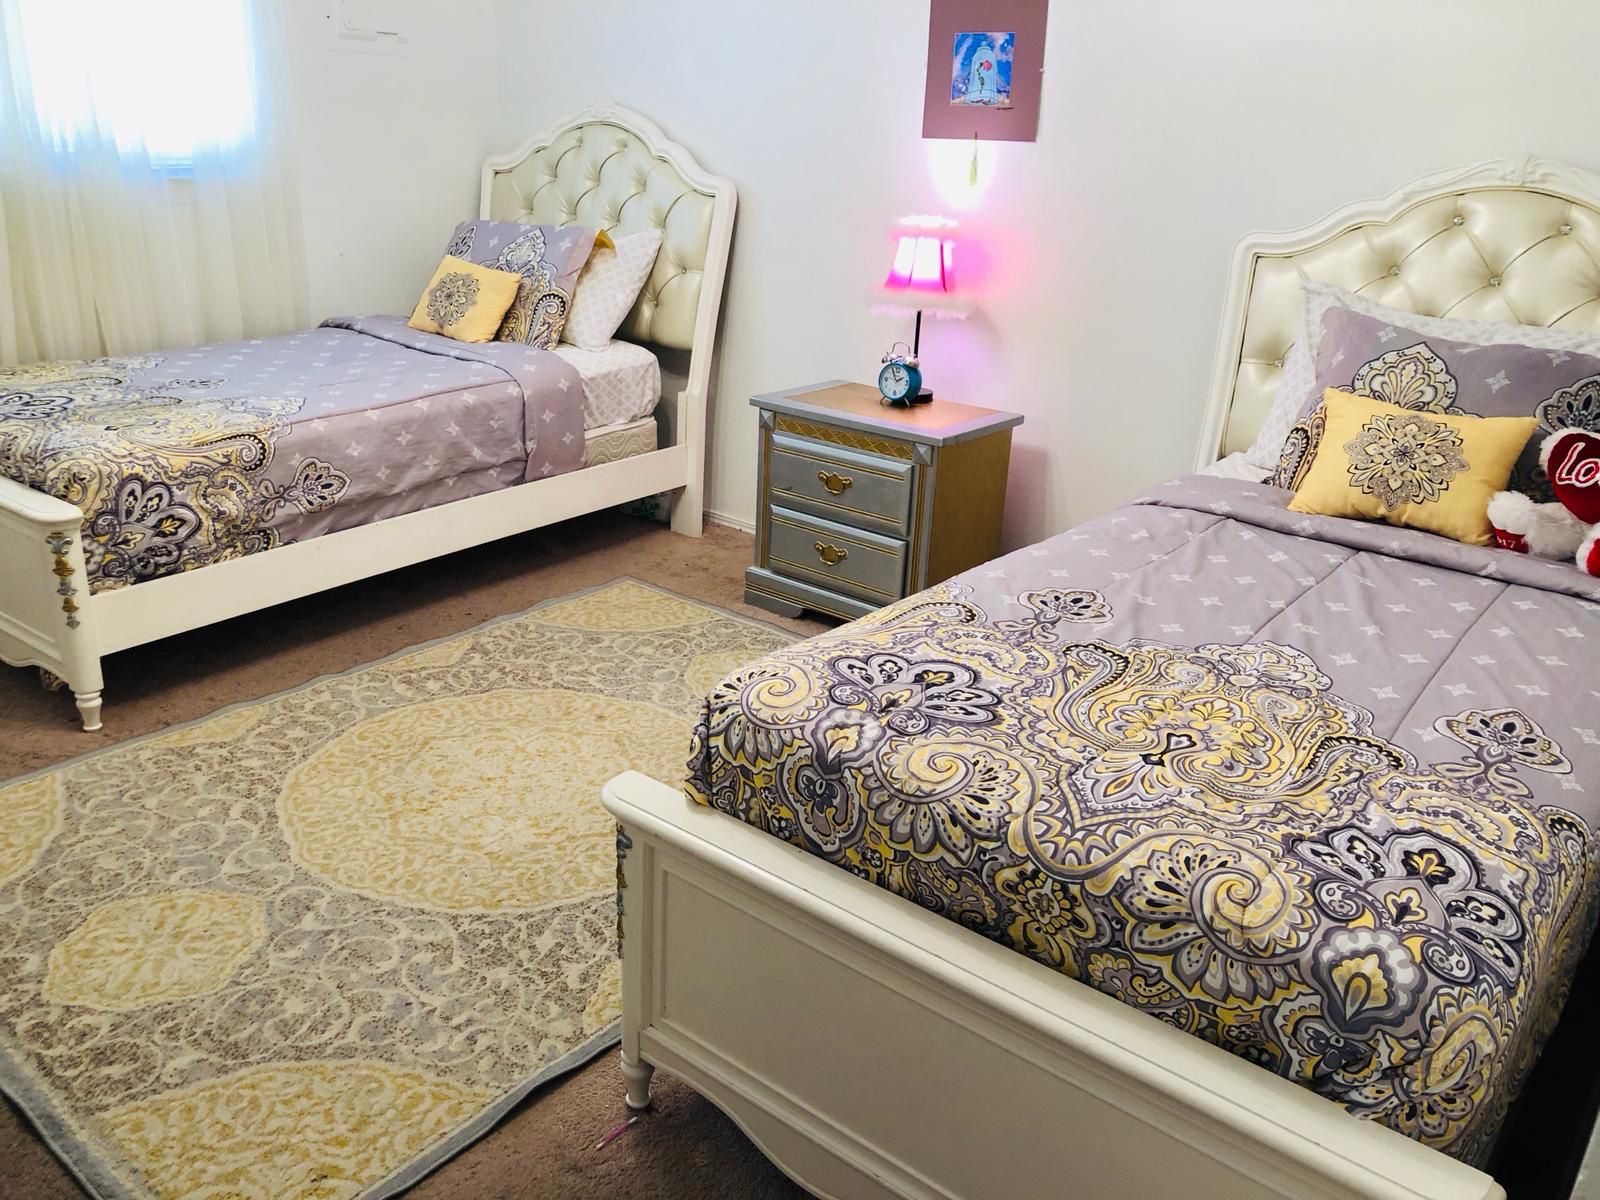 Princesses beds size twin The two beds they come with a rug, One night stand, lamp, Two frames, two mattresses, pillows,and blankets